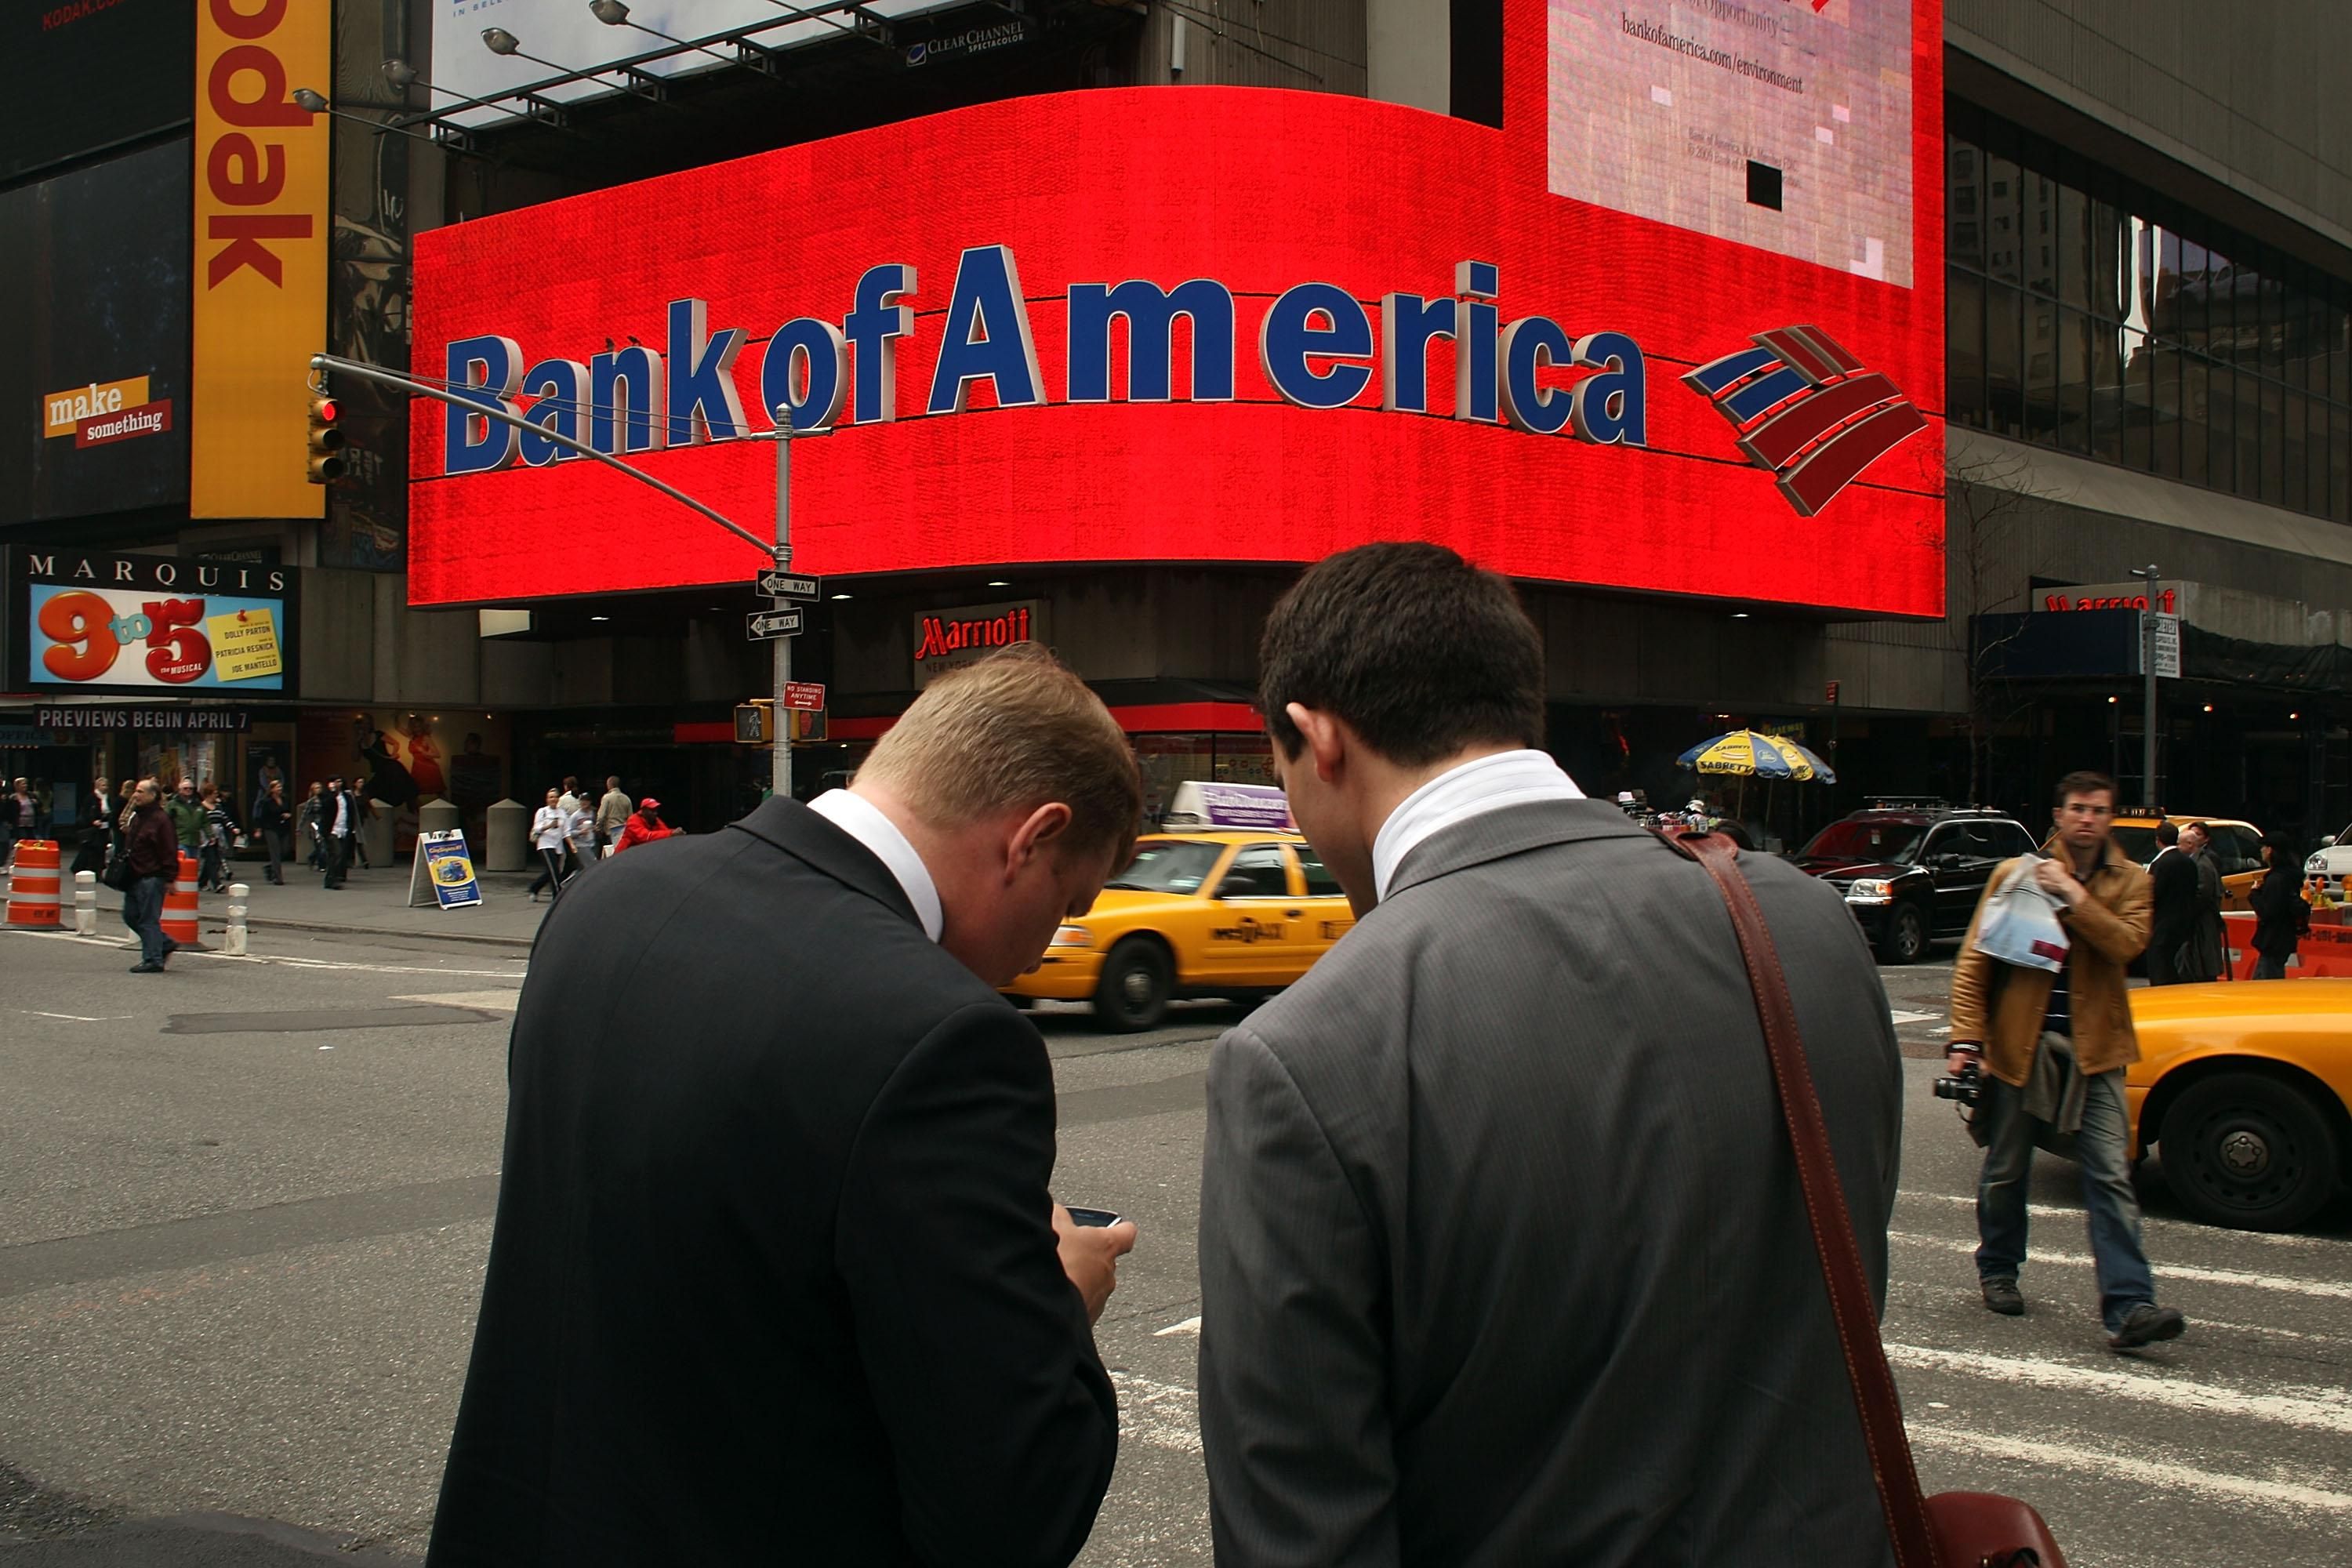 Bank of America sign in New York City